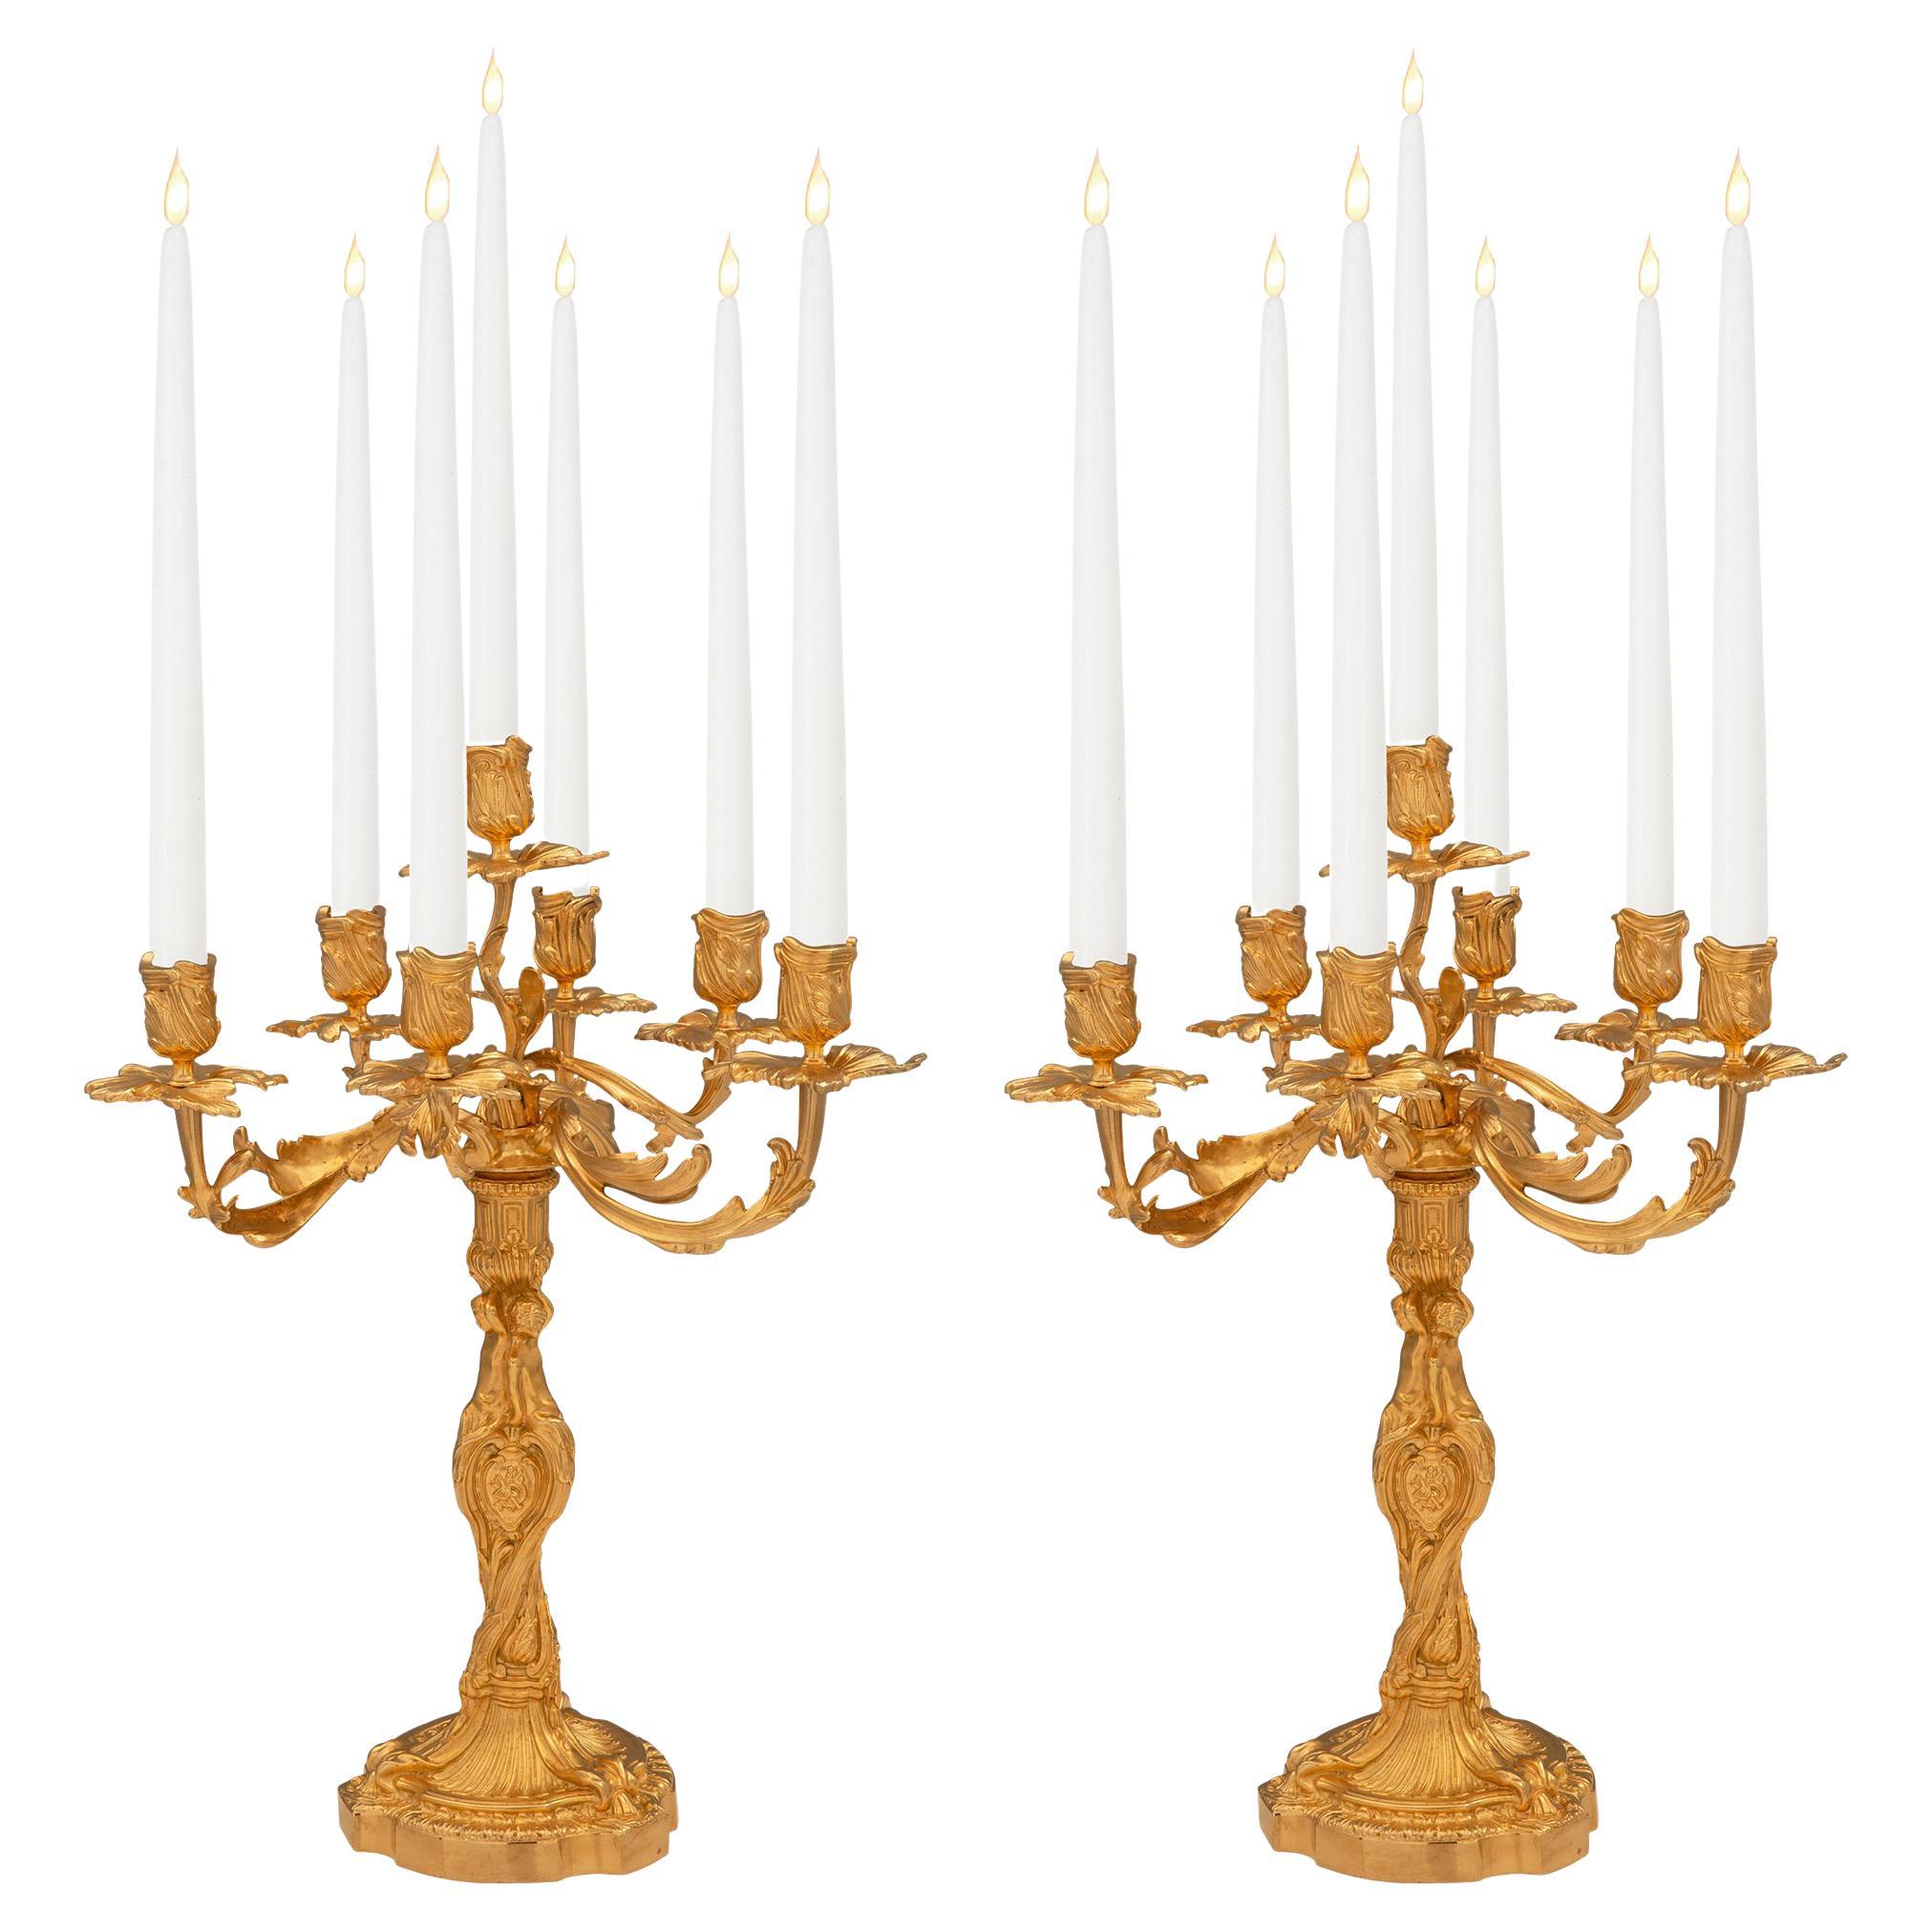 Pair of Mid-19th Century French Louis XV Style Seven Arm Candelabras For Sale